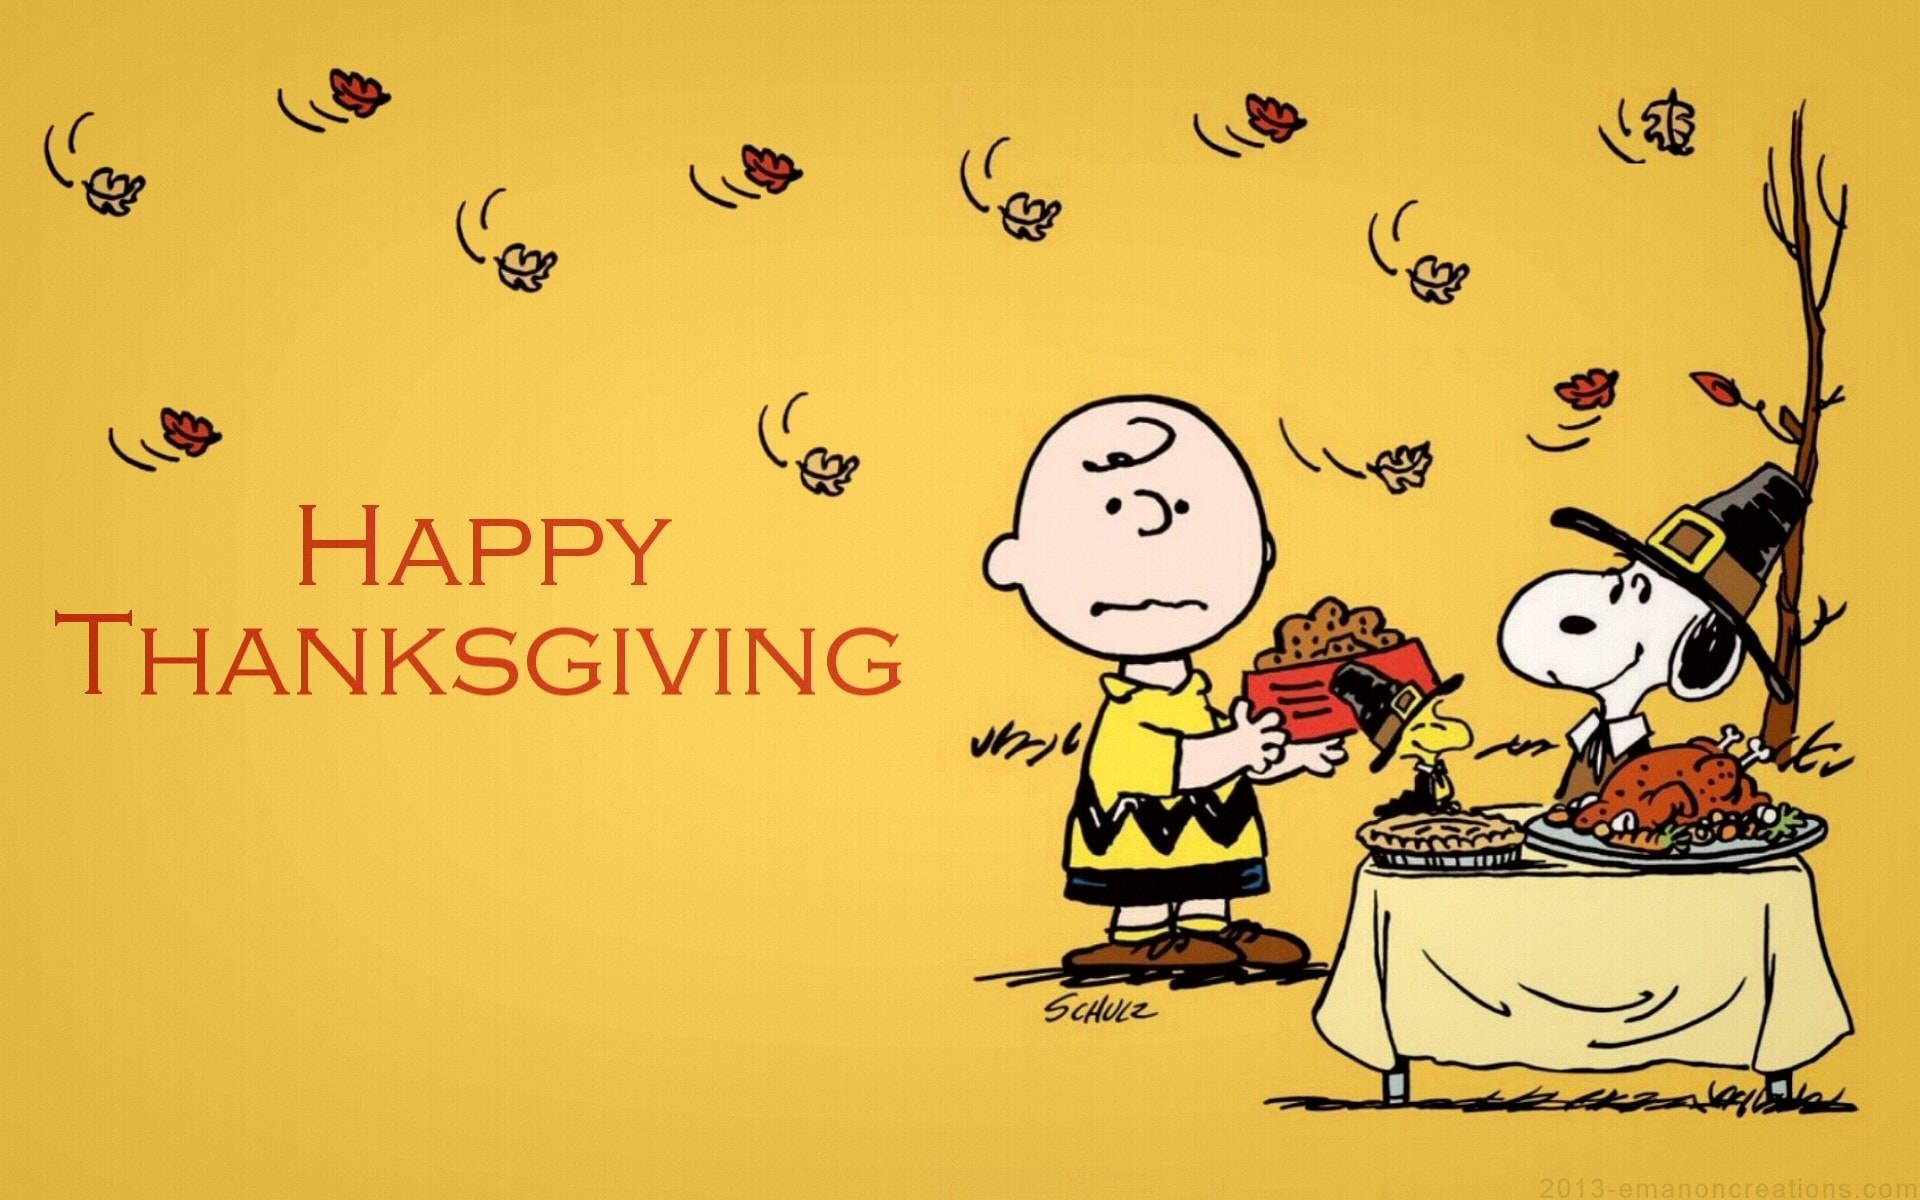 Thanksgiving is a time to be grateful for all the blessings in our lives. - Charlie Brown, Thanksgiving